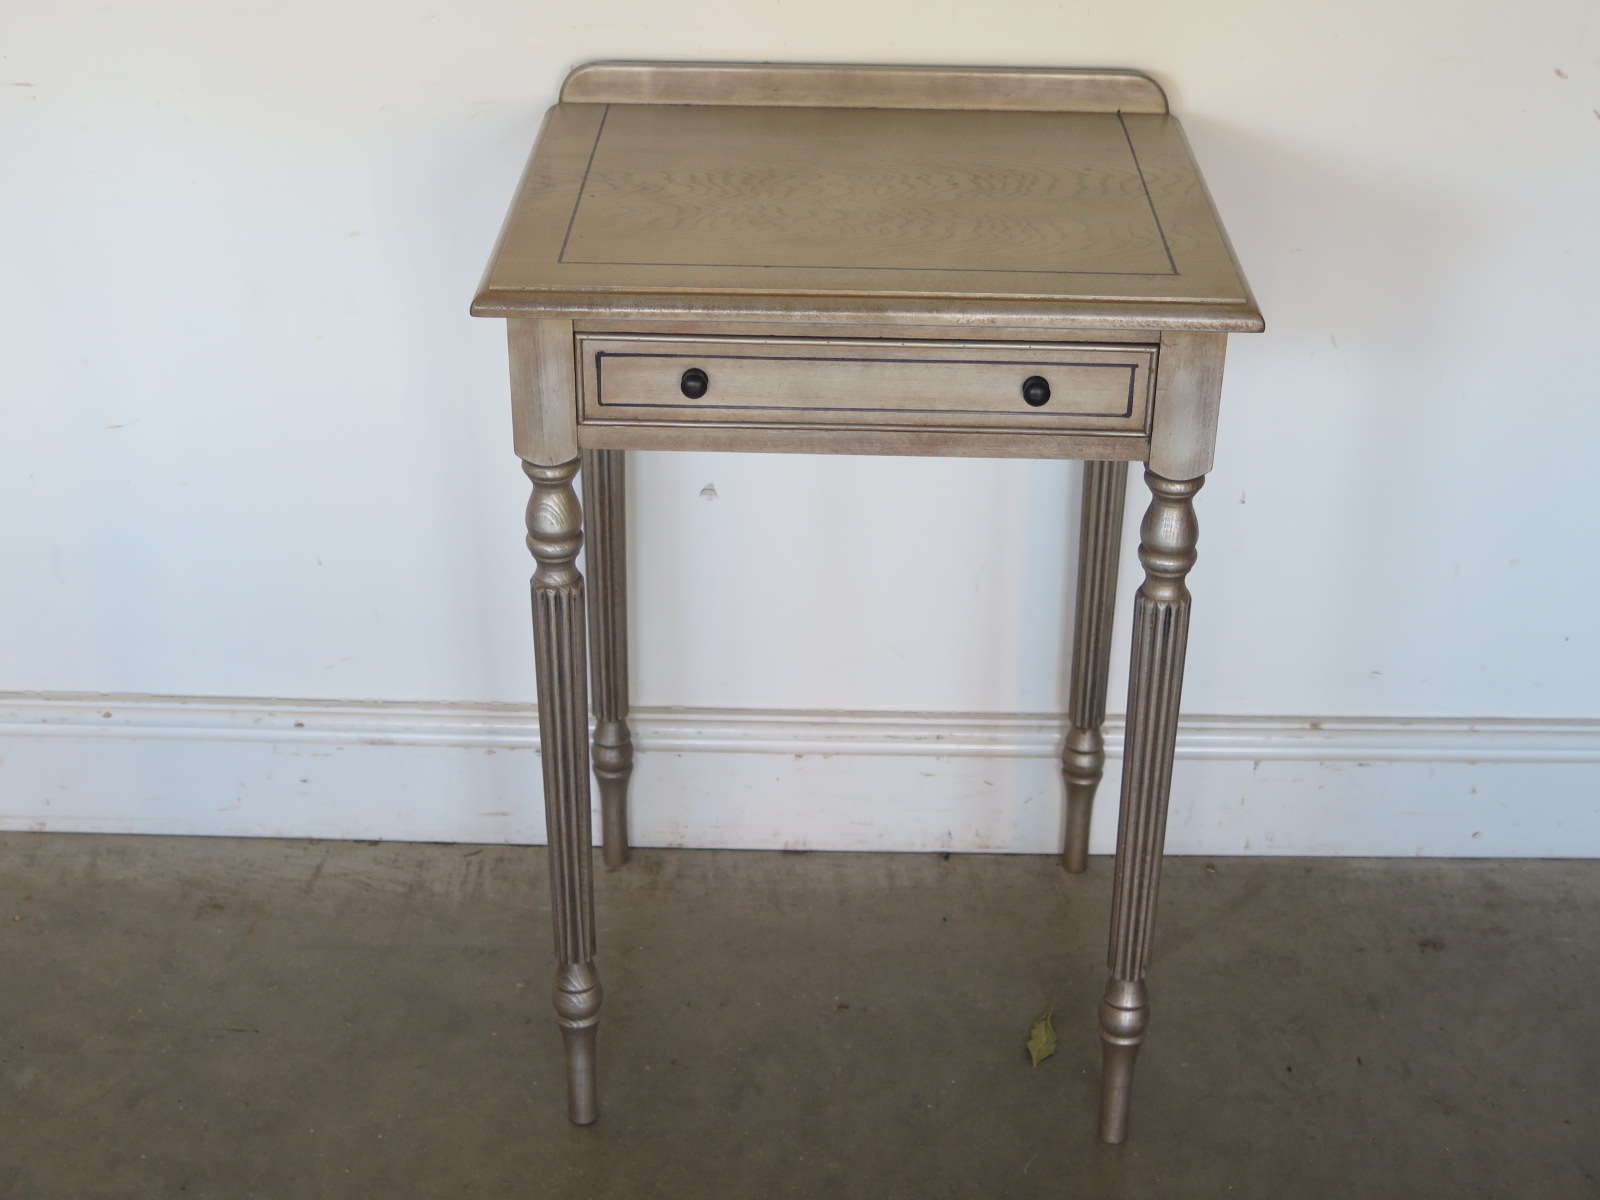 A modern grey side table - Height 73cm x Width 53cm - in good condition